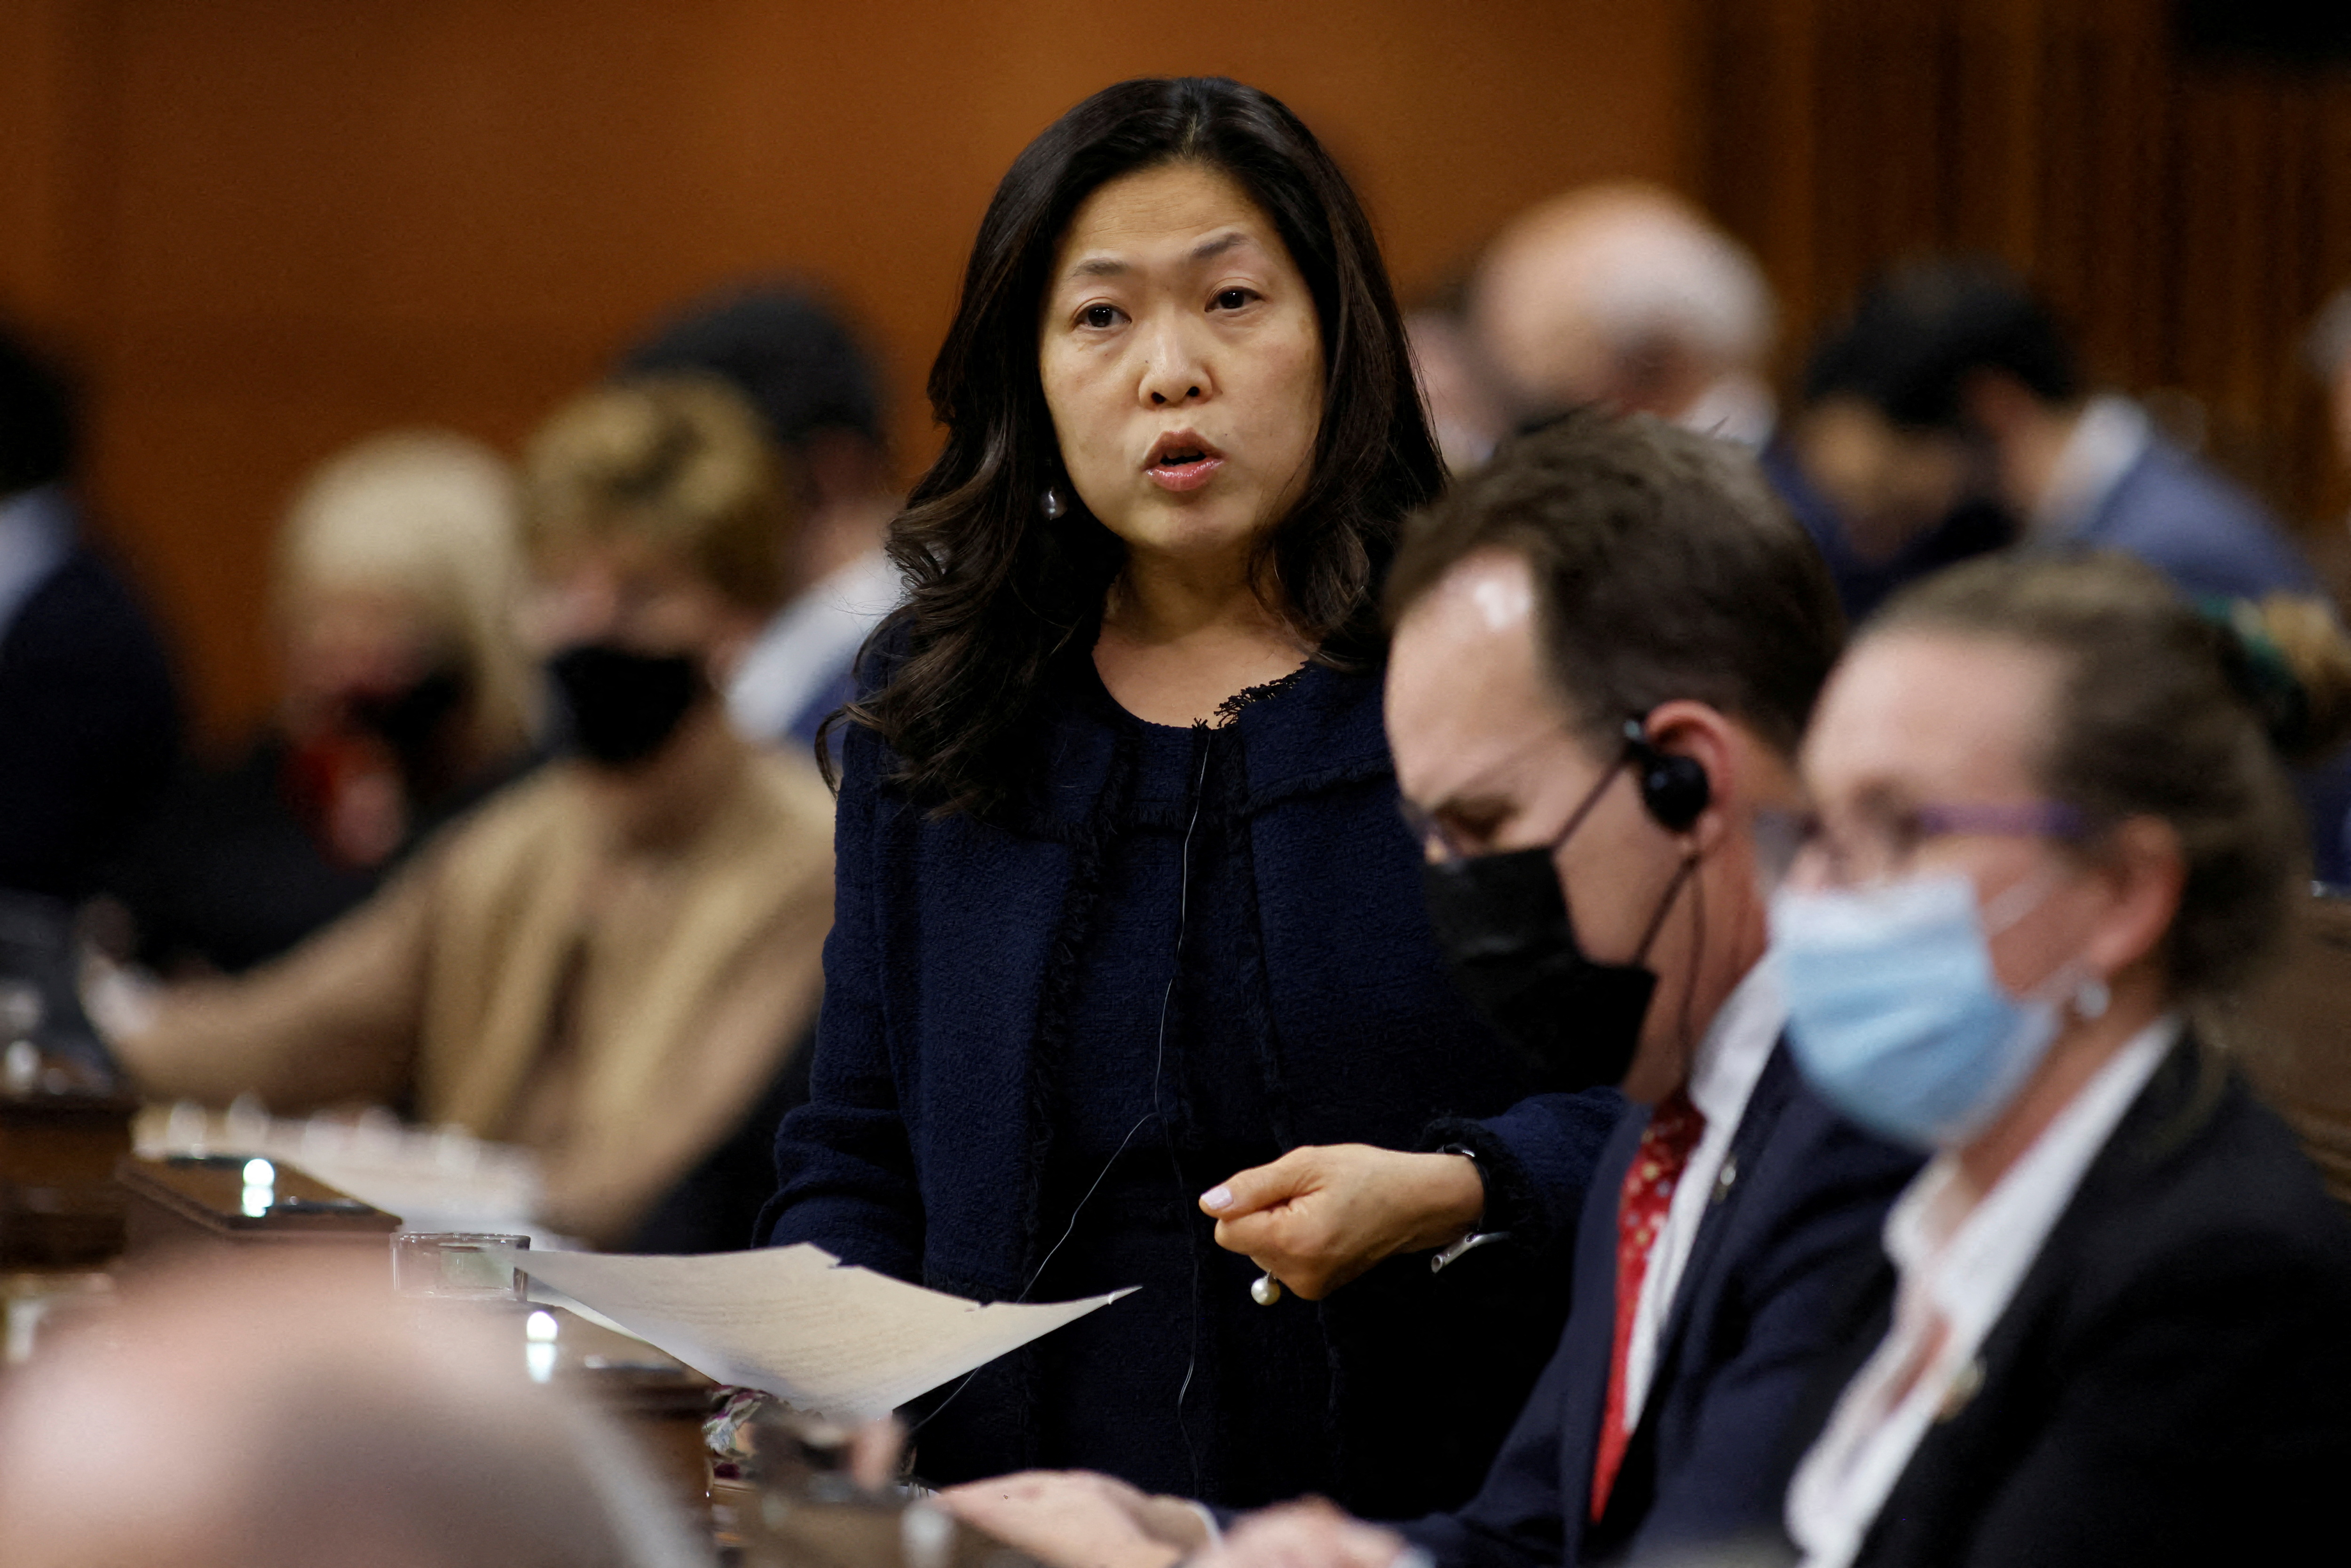 Canada's Minister of International Trade, Export Promotion, Small Business and Economic Development Mary Ng speaks during Question Period in the House of Commons on Parliament Hill in Ottawa, Ontario, Canada December 14, 2021. REUTERS/Blair Gable/File Photo